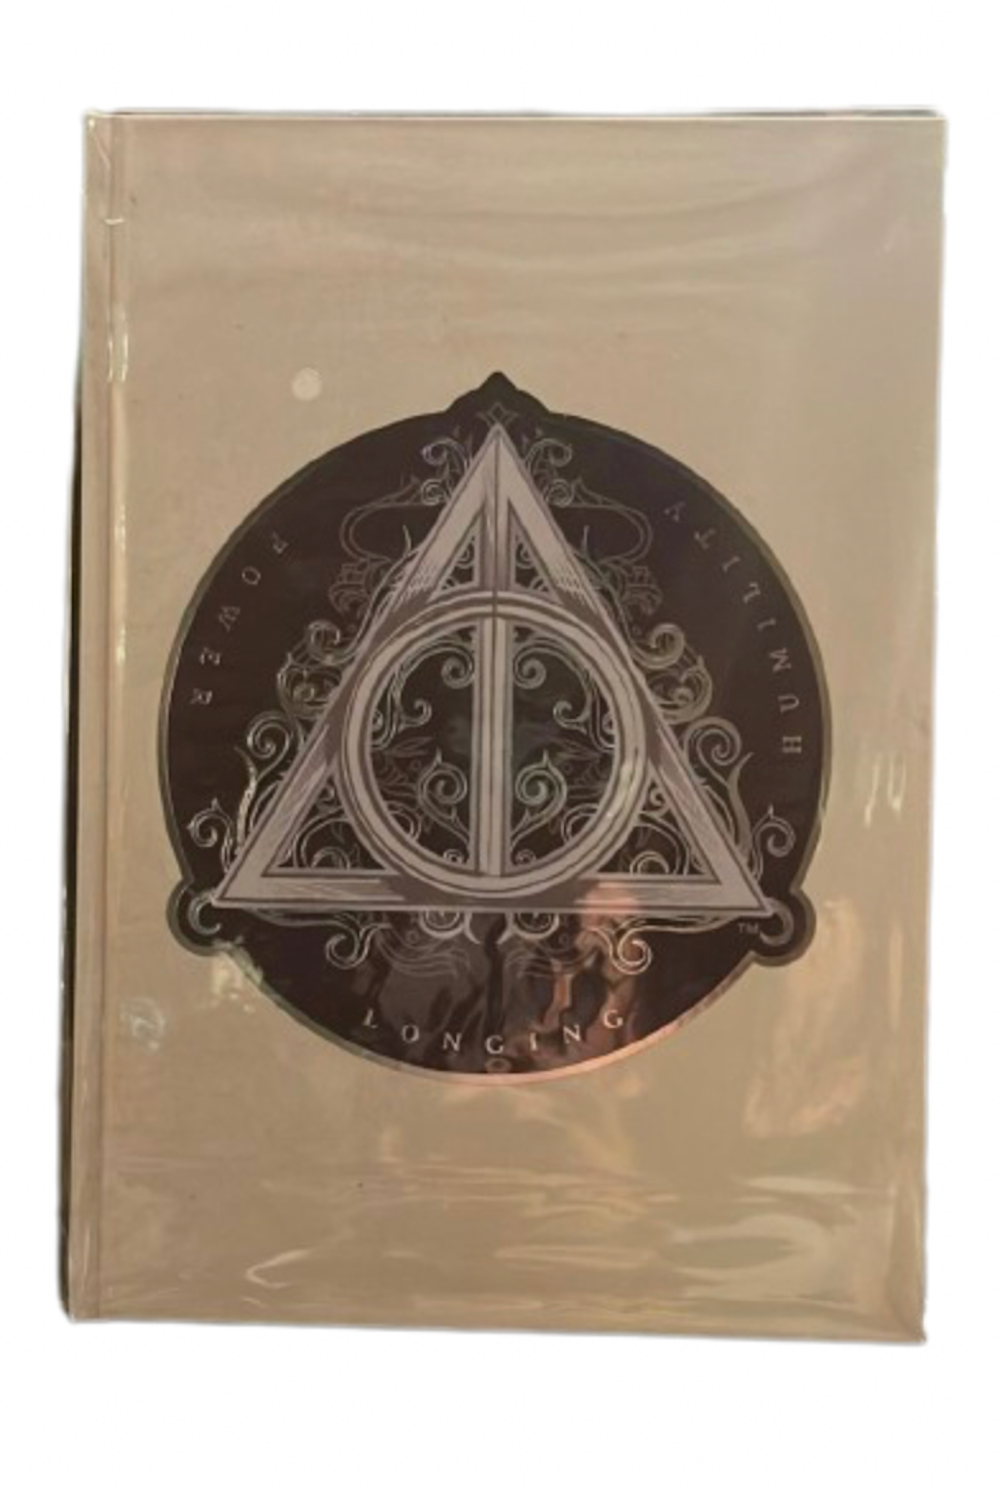 Universal Studios Wizarding World of Harry Potter The Deathly Hallows Journal